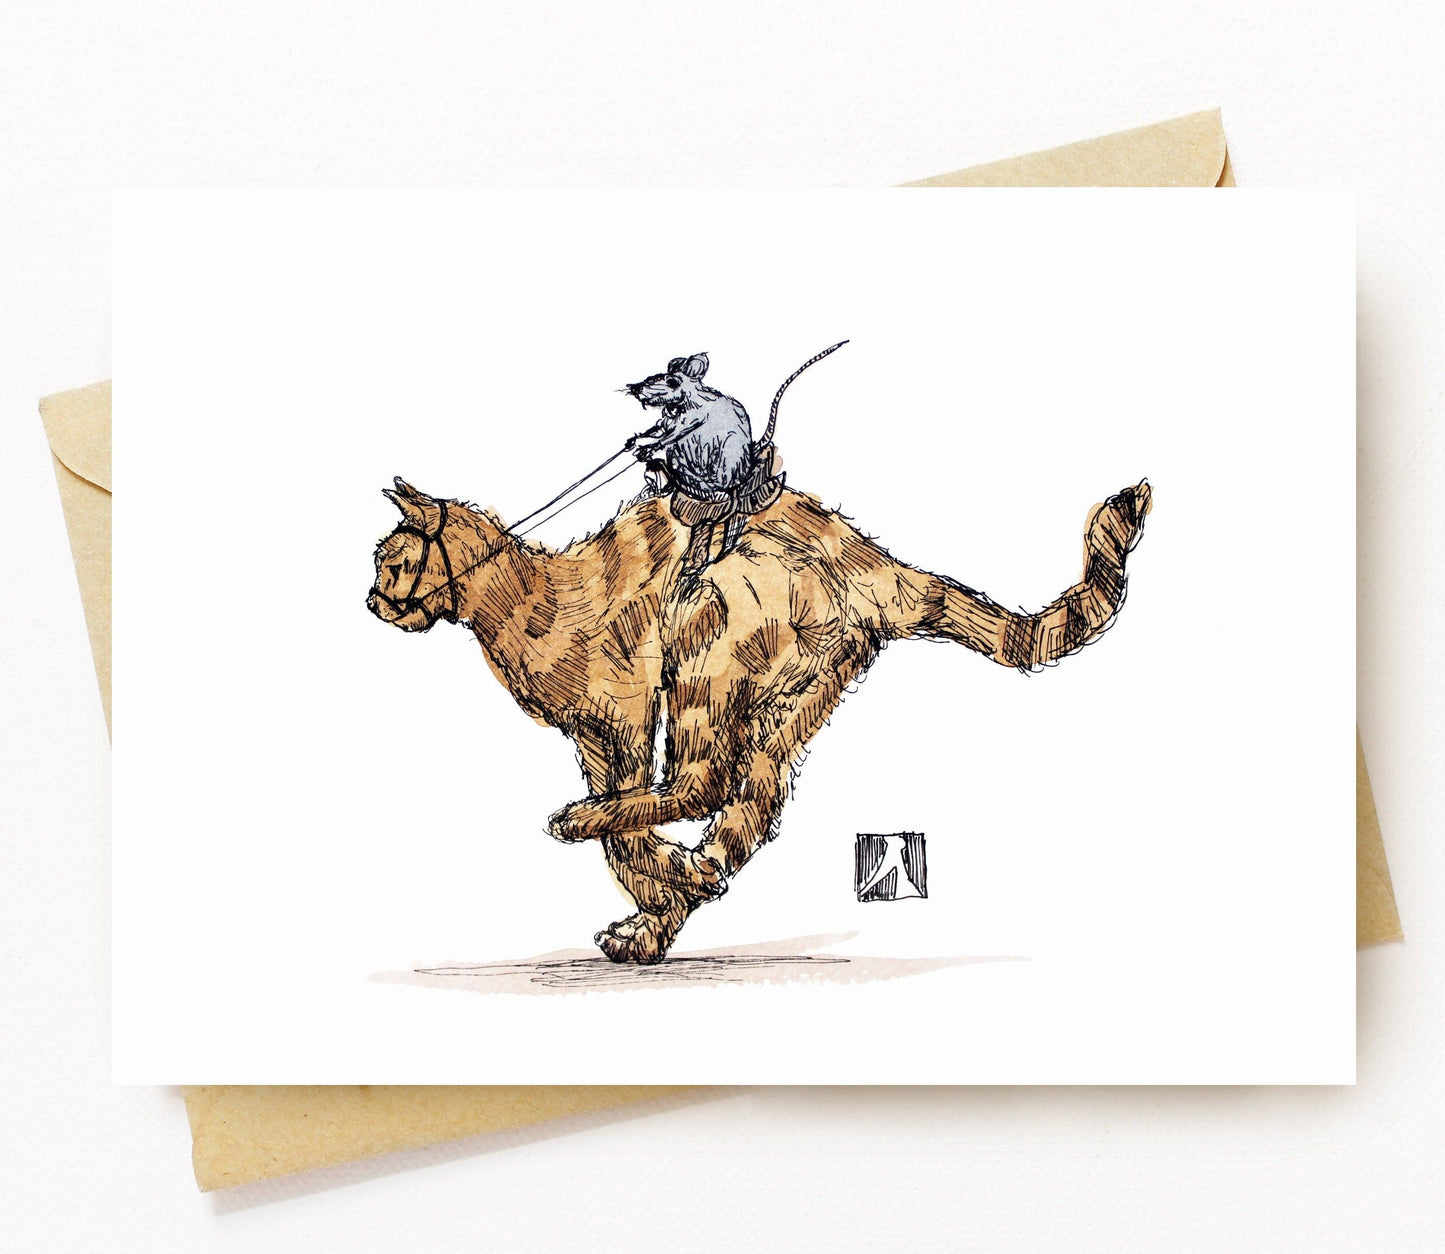 BellavanceInk: Greeting Card With A Pen & Ink Drawing Of A Rat Riding A Saddled Cat 5 x 7 Inches - BellavanceInk